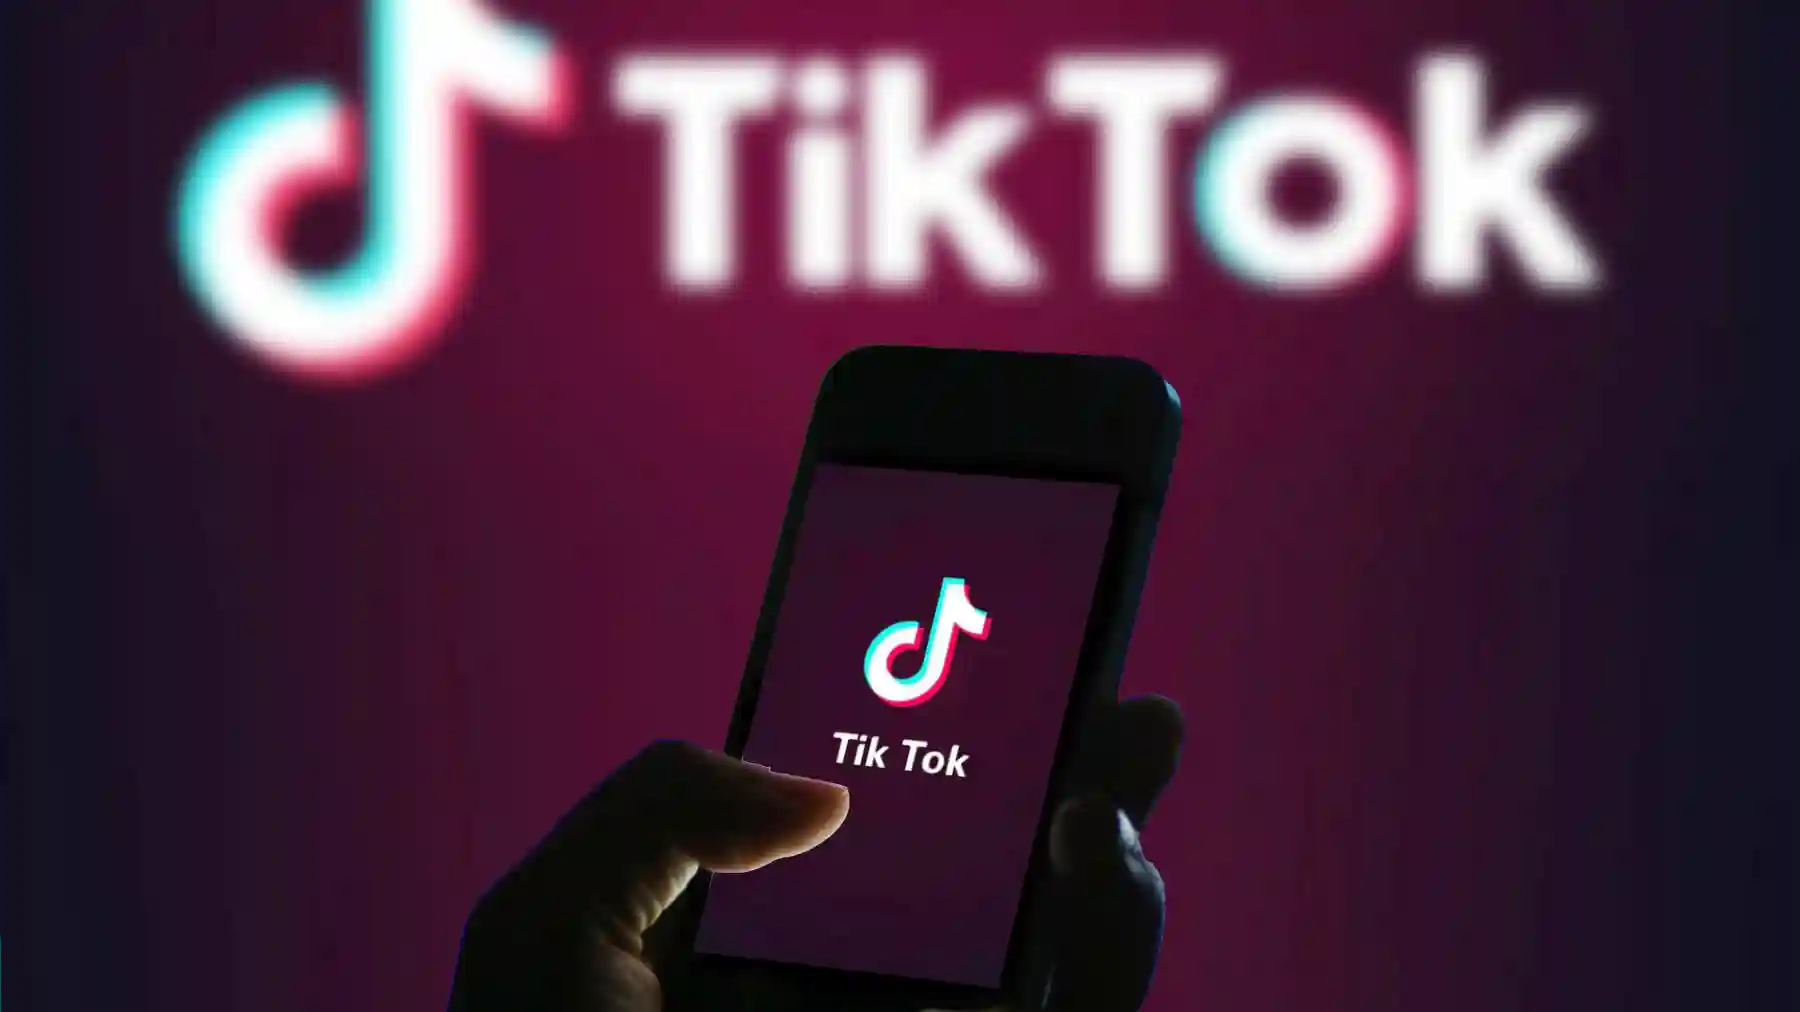 TikTok Hearts and How To Get More